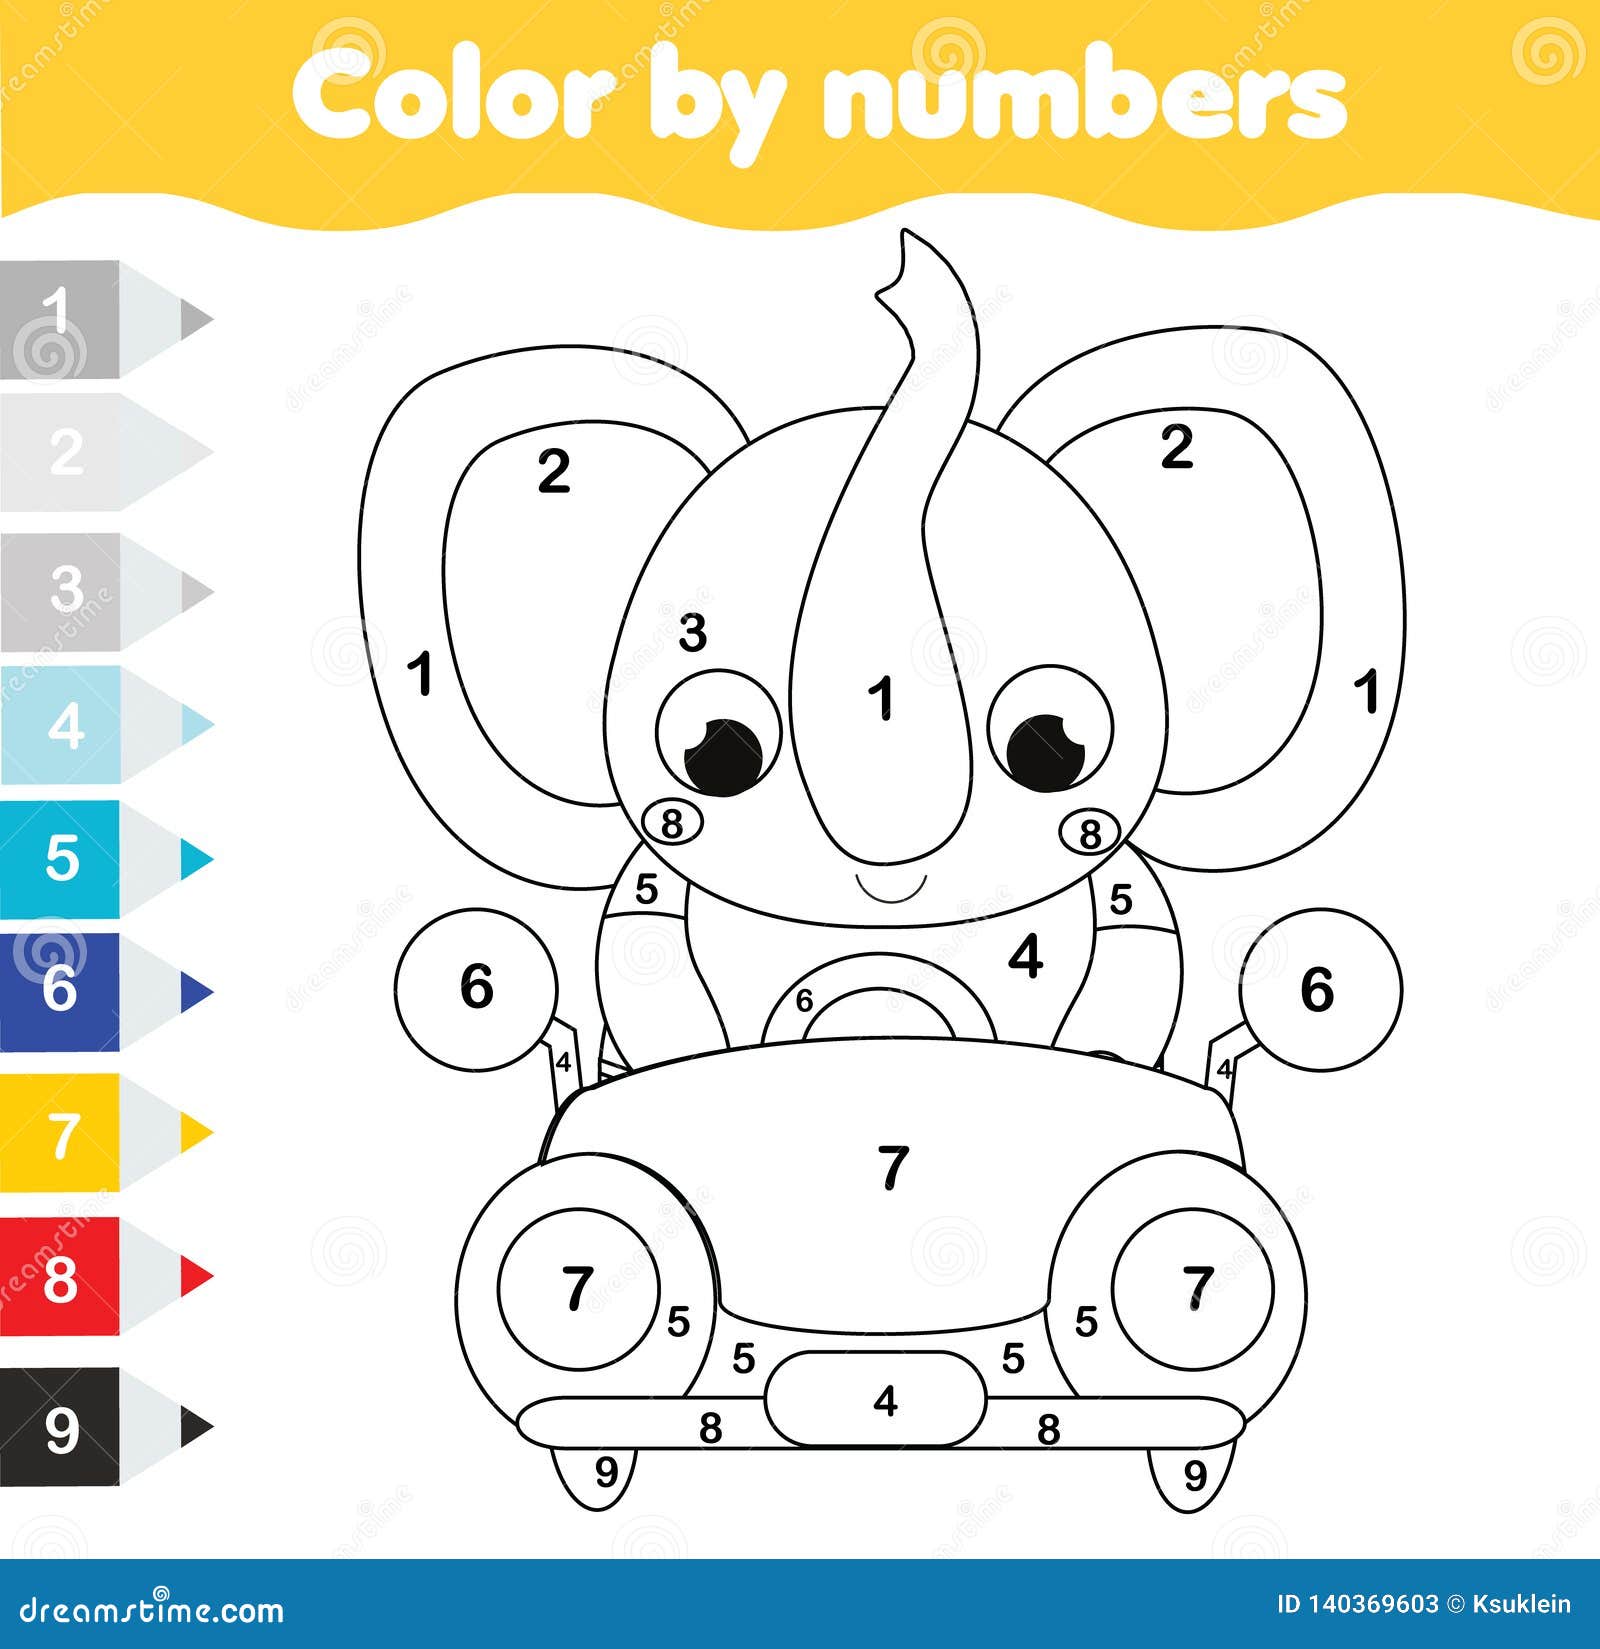 Coloring Page for Kids. Educational Children Game. Color by ...